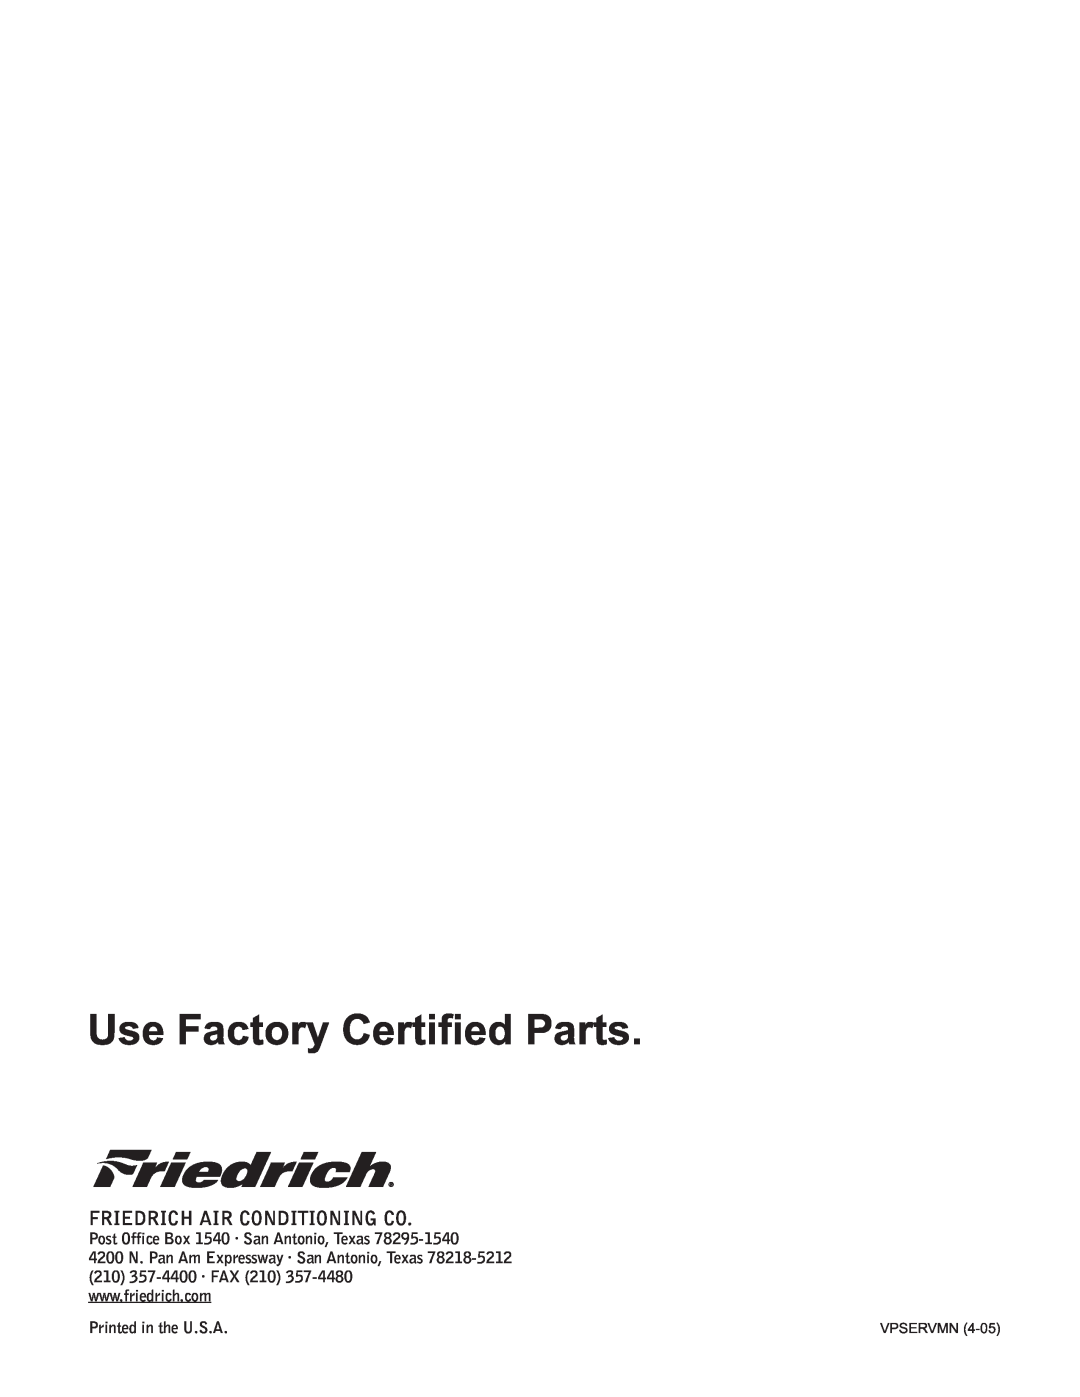 Friedrich H)A09K25 Use Factory Certiﬁed Parts, Friedrich Air Conditioning Co, Post Office Box 1540 · San Antonio, Texas 